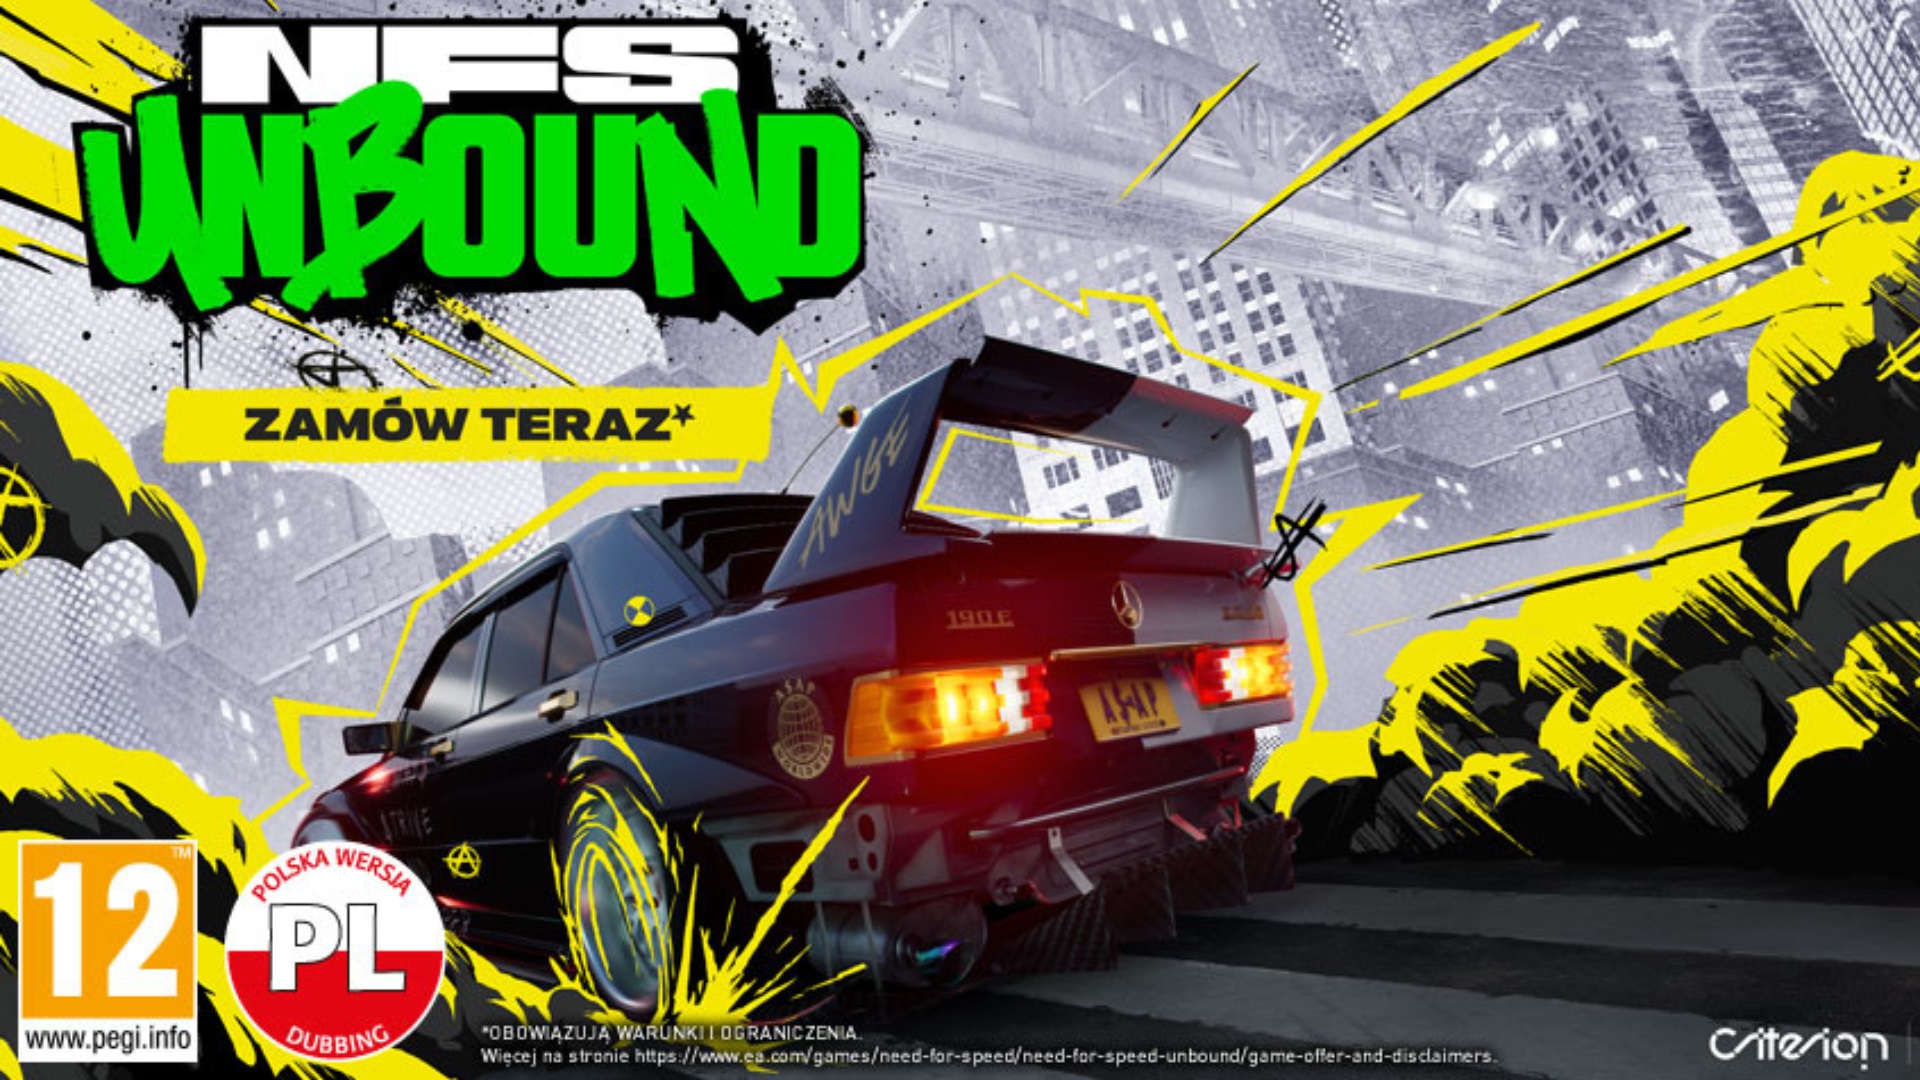 NFS - Need for Speed Unbound